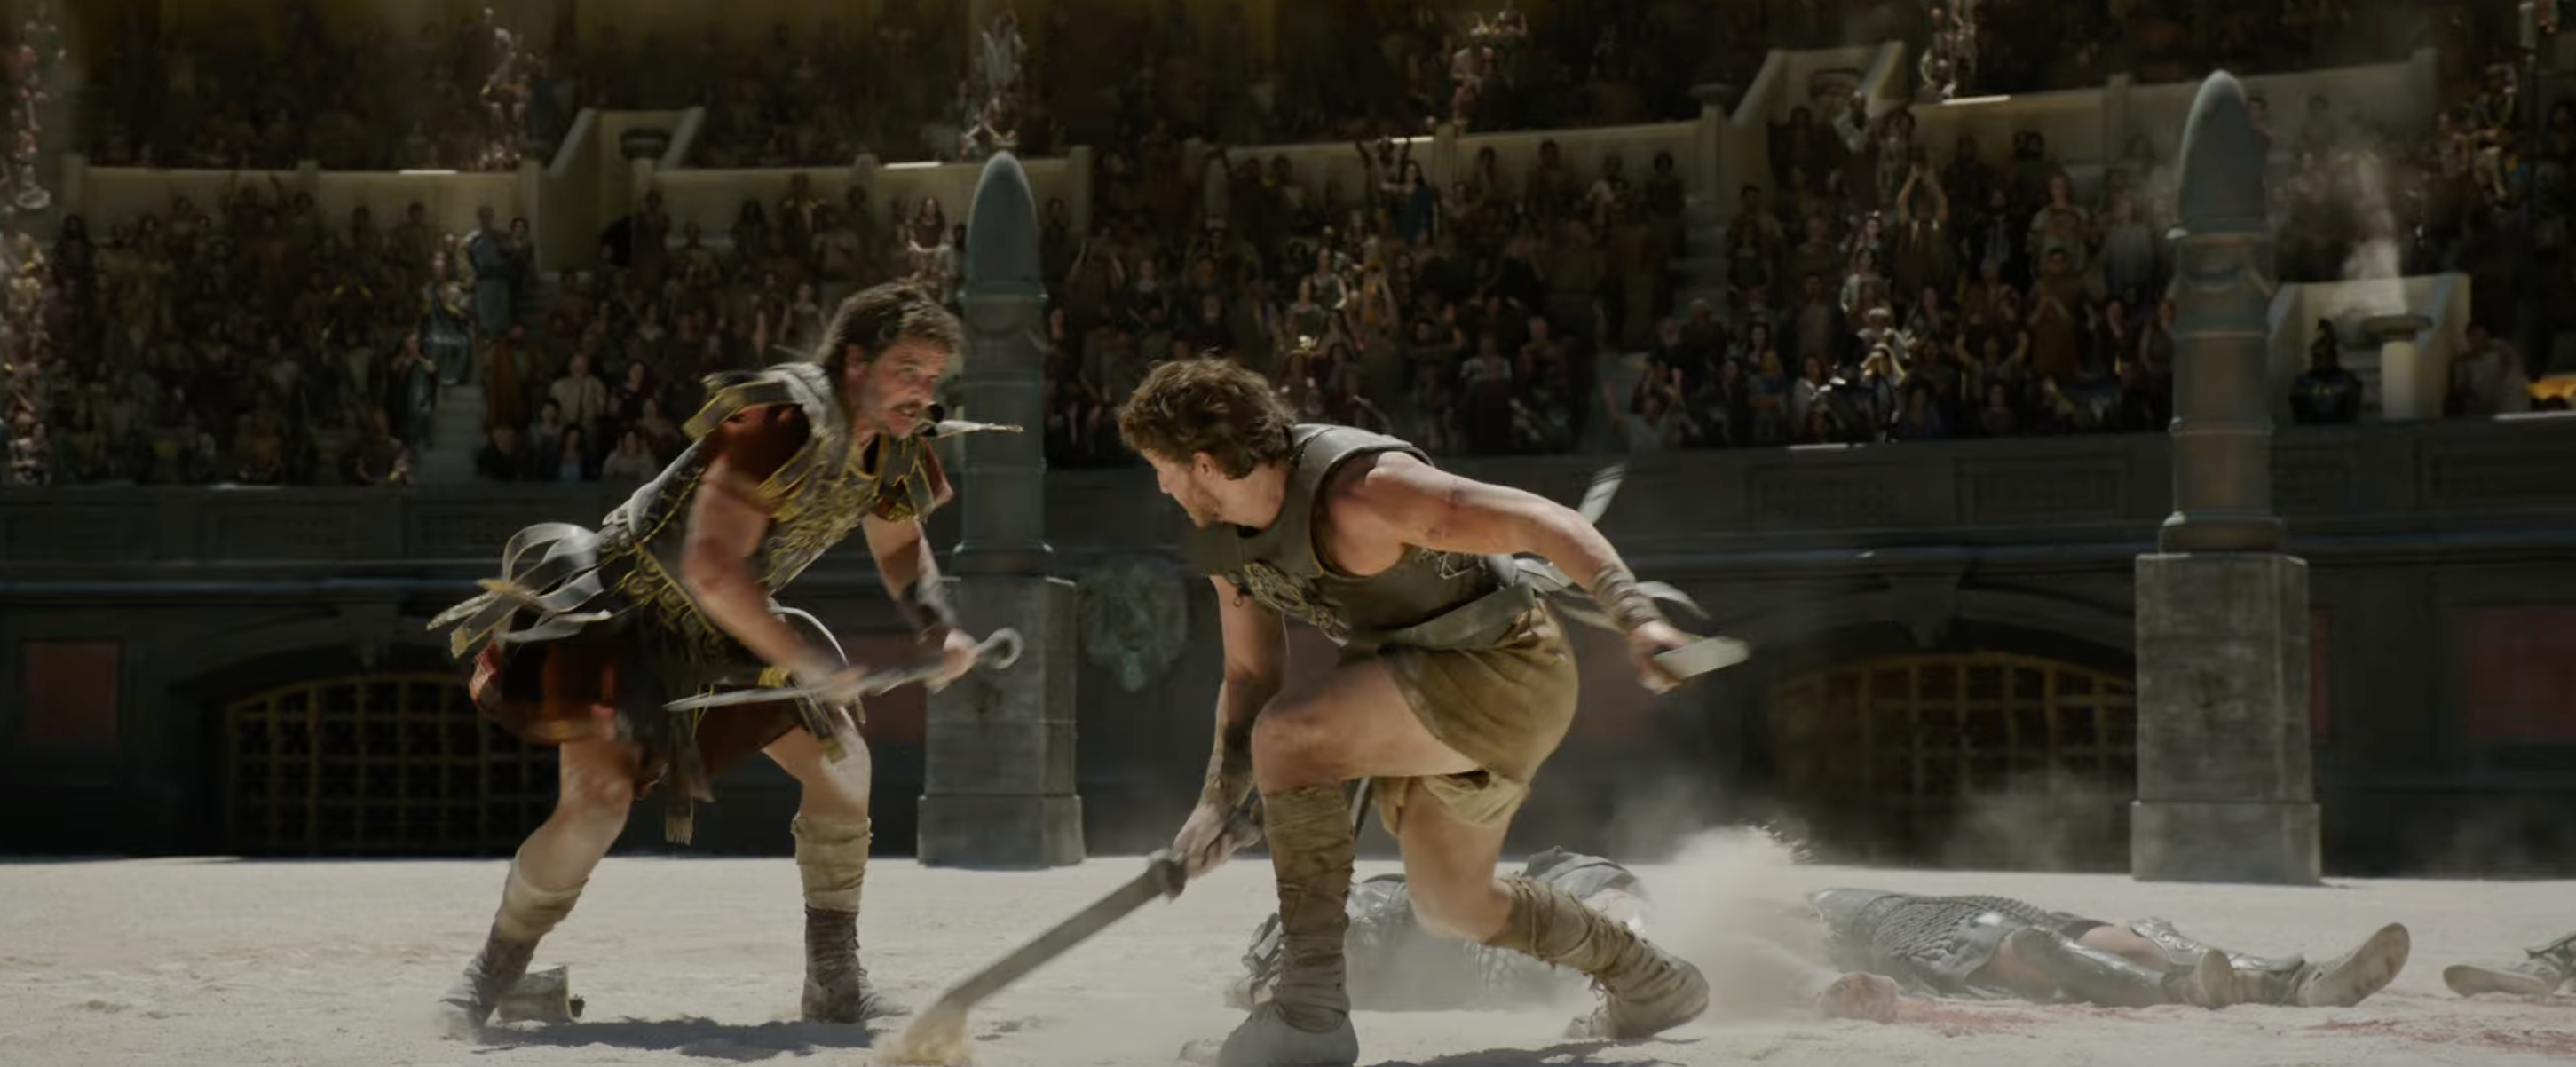 Two gladiators fight in an ancient arena, surrounded by spectators. One combatant aggressively swings a weapon while another defends on the ground